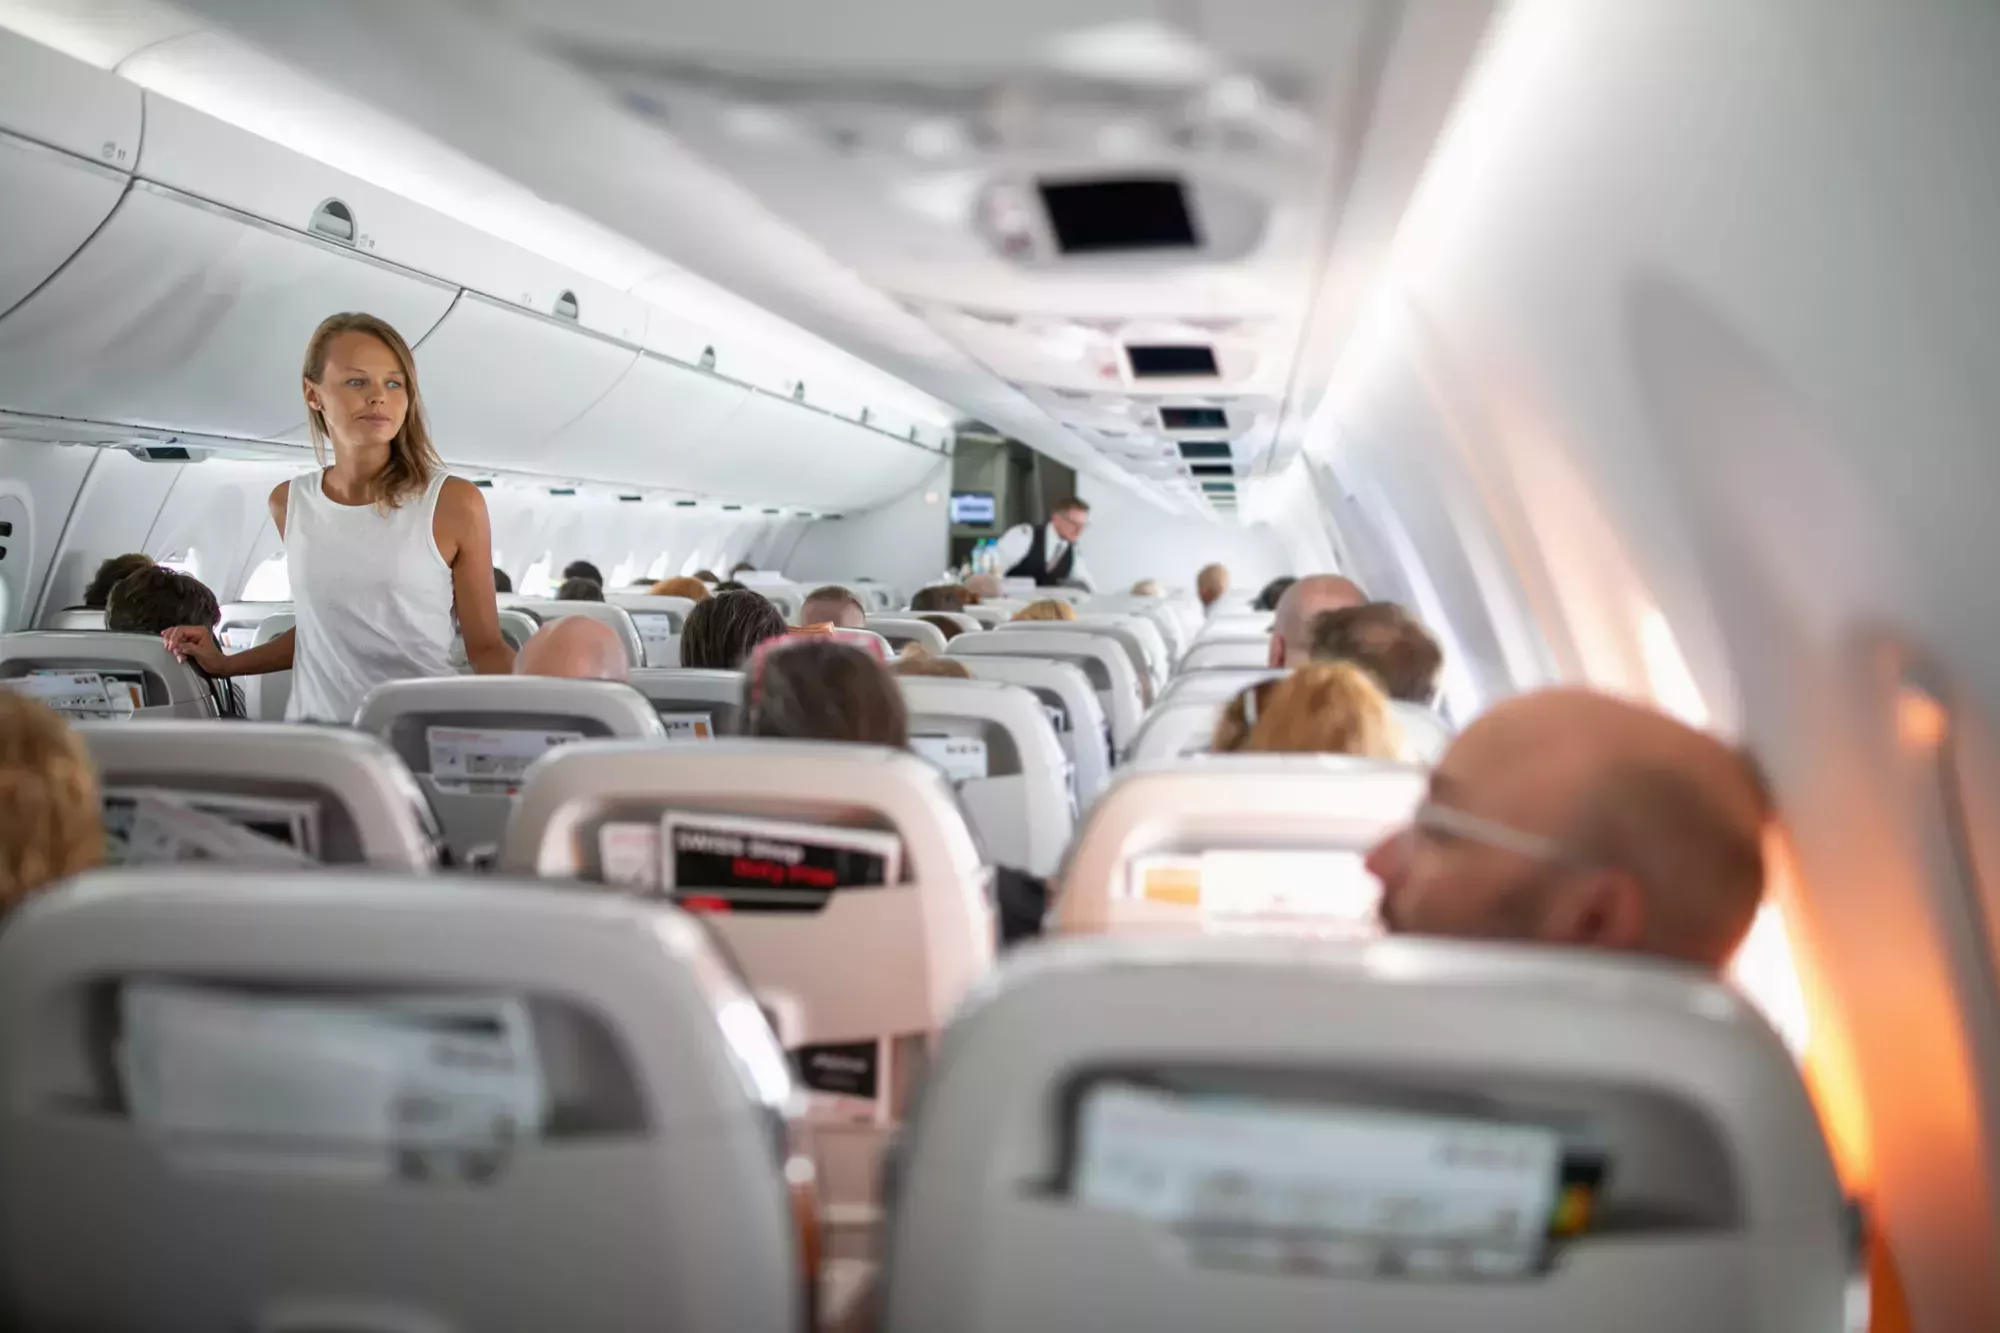 People sitting in an airplane